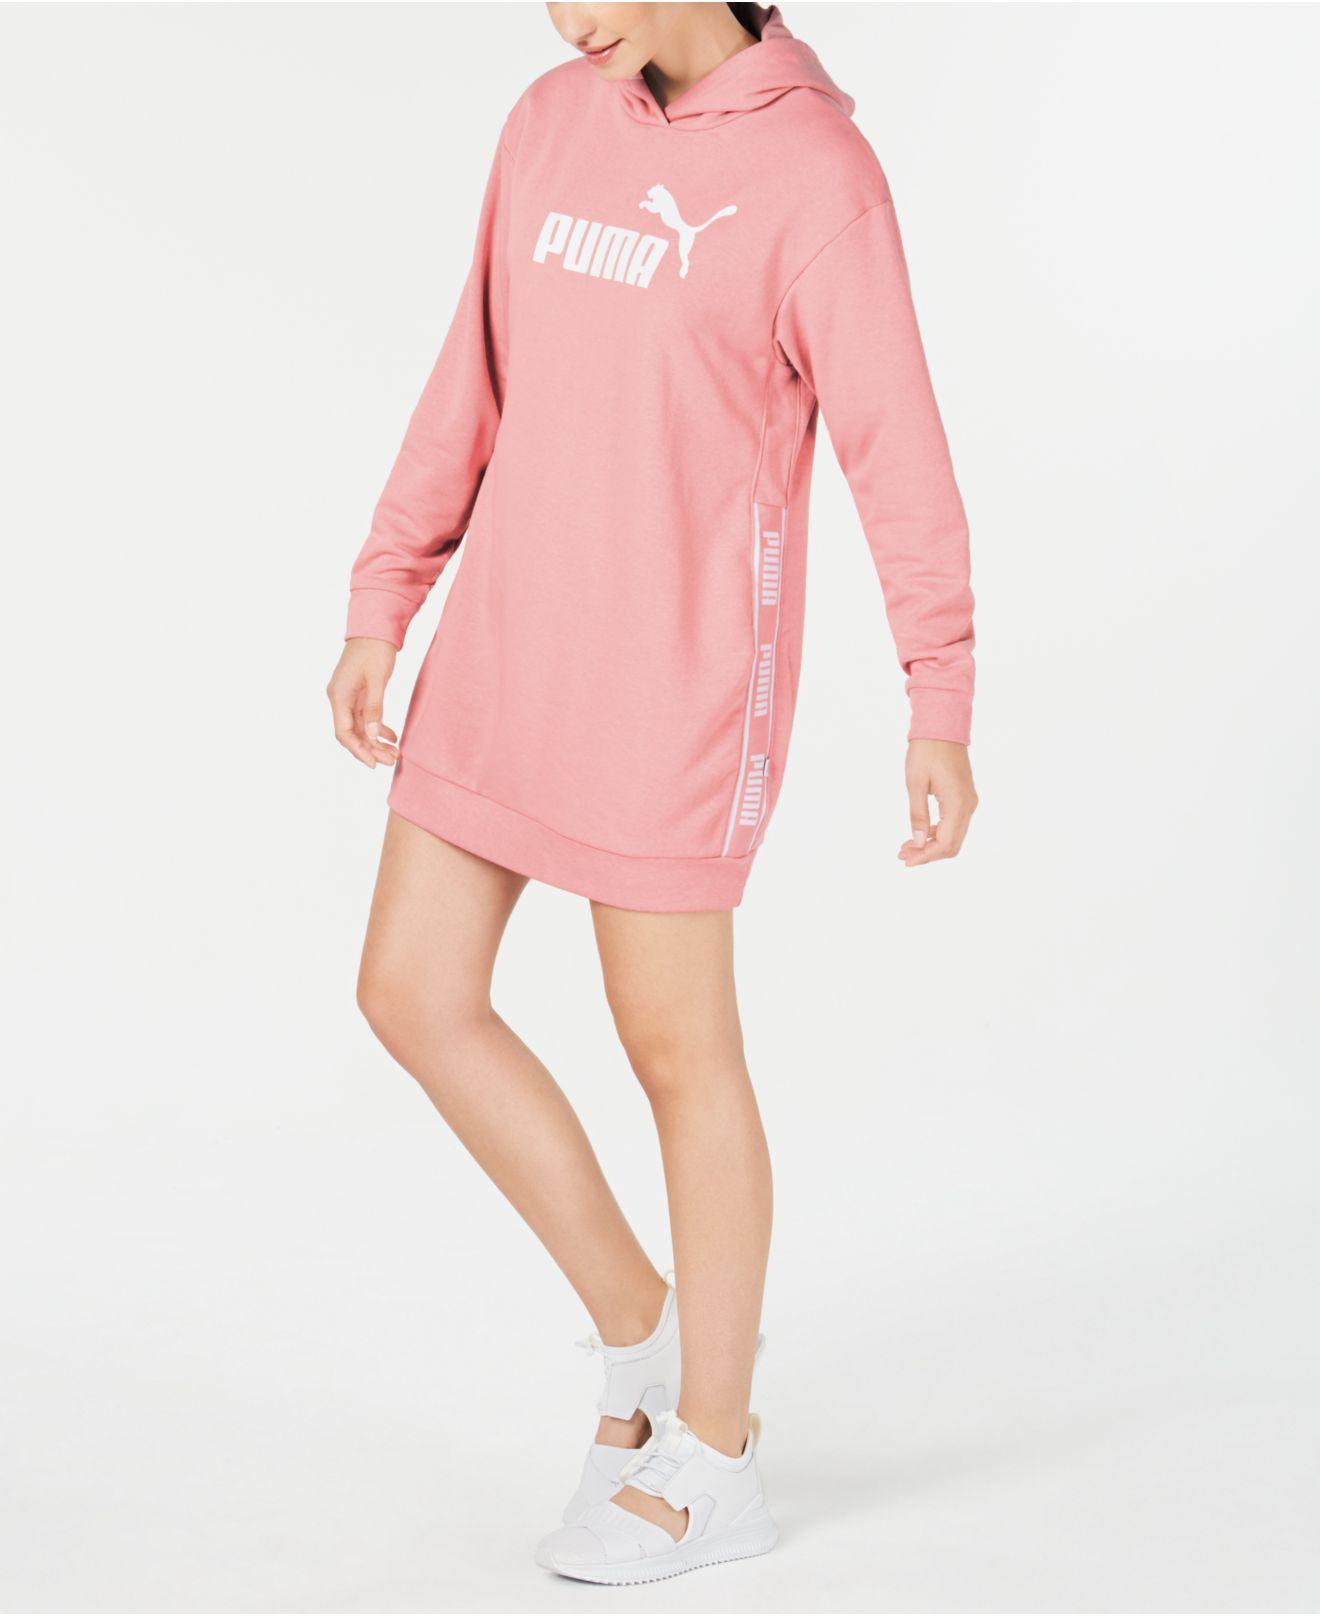 PUMA Cotton Amplified Hoodie Dress in 